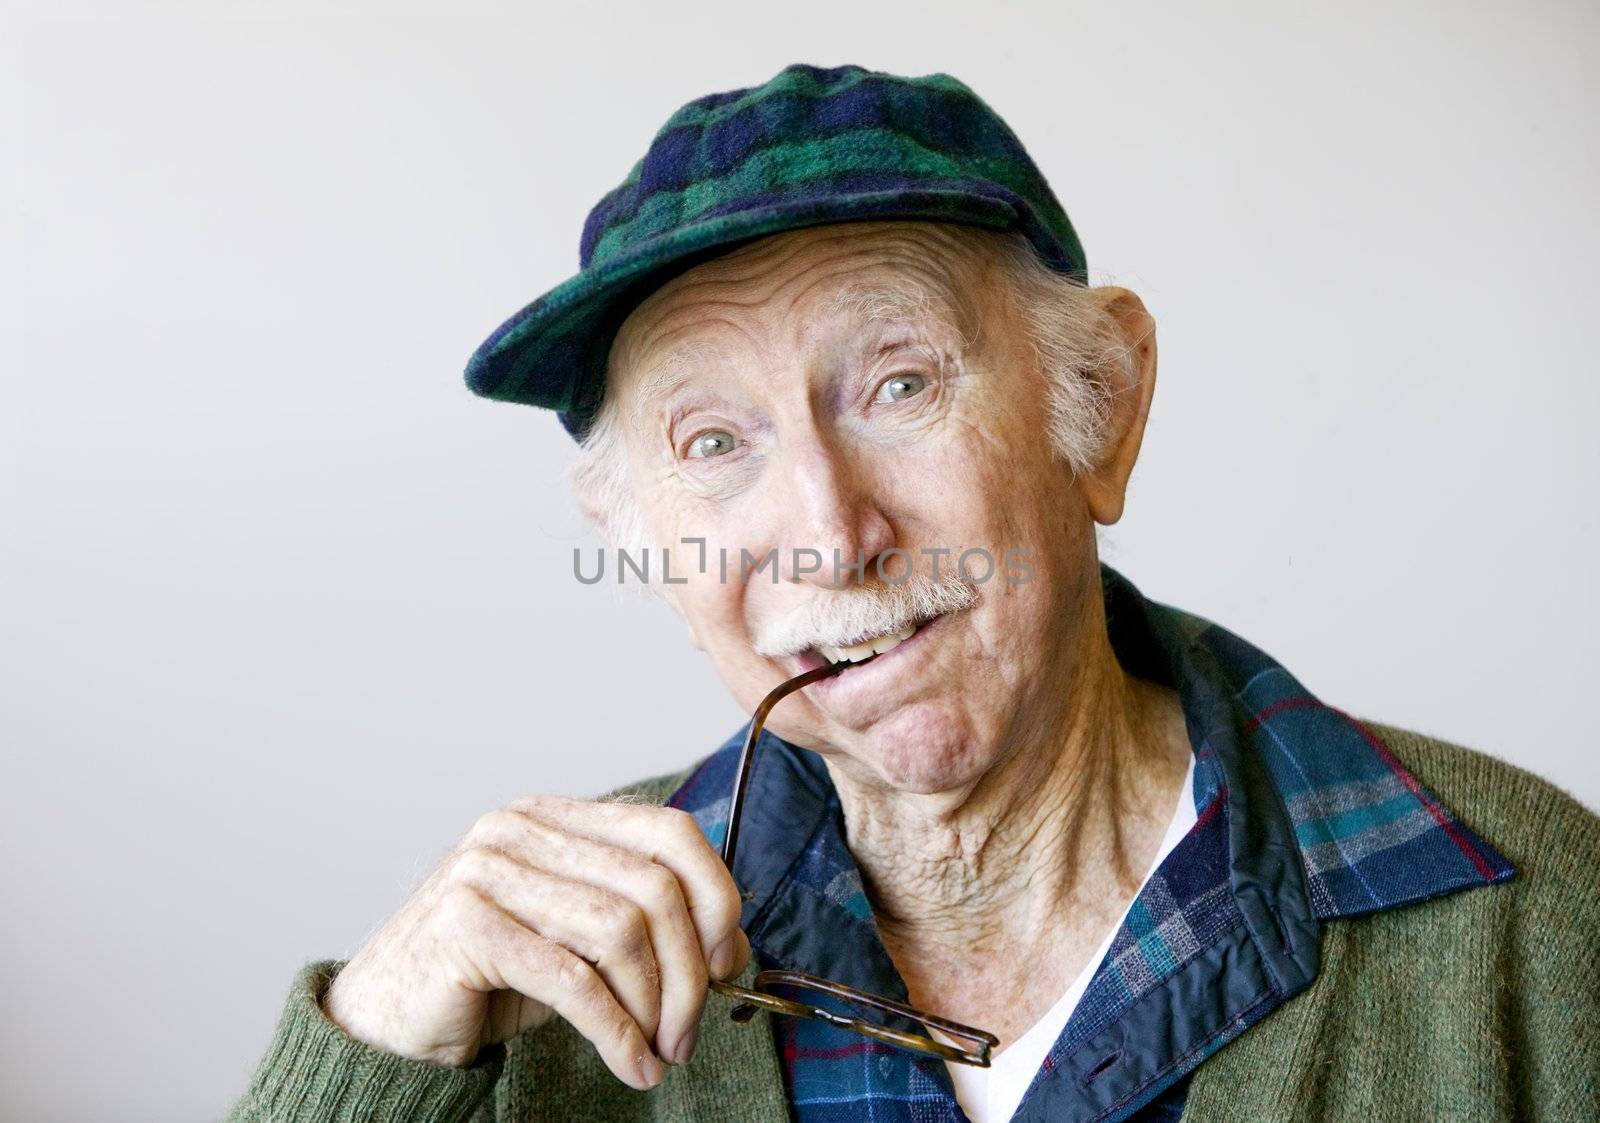 Portrait of a thoughtful senior citizen with glasses wearing a hat.